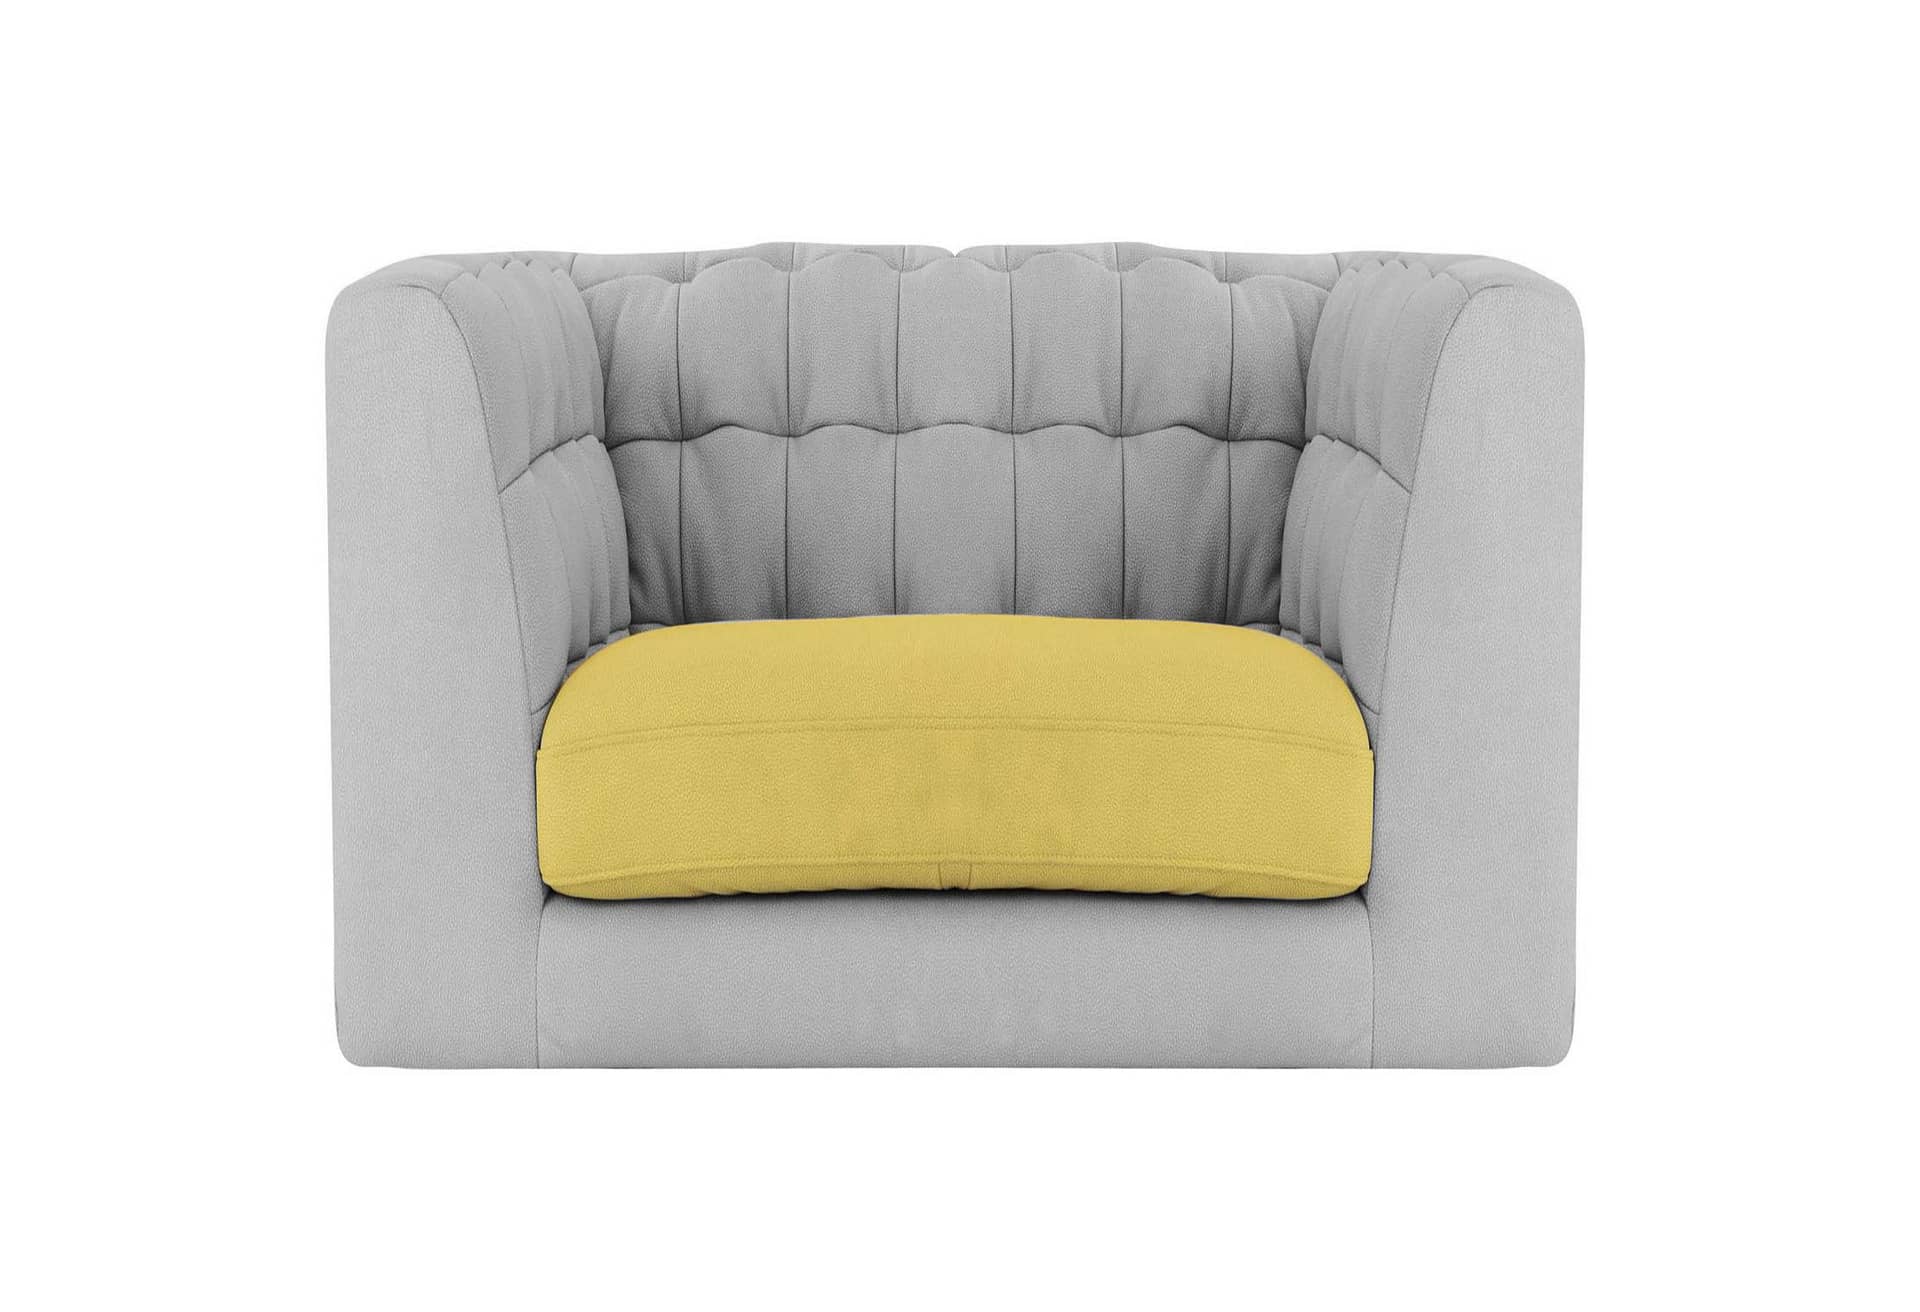 Foam Chair Cushions - Upholstery on Broadway